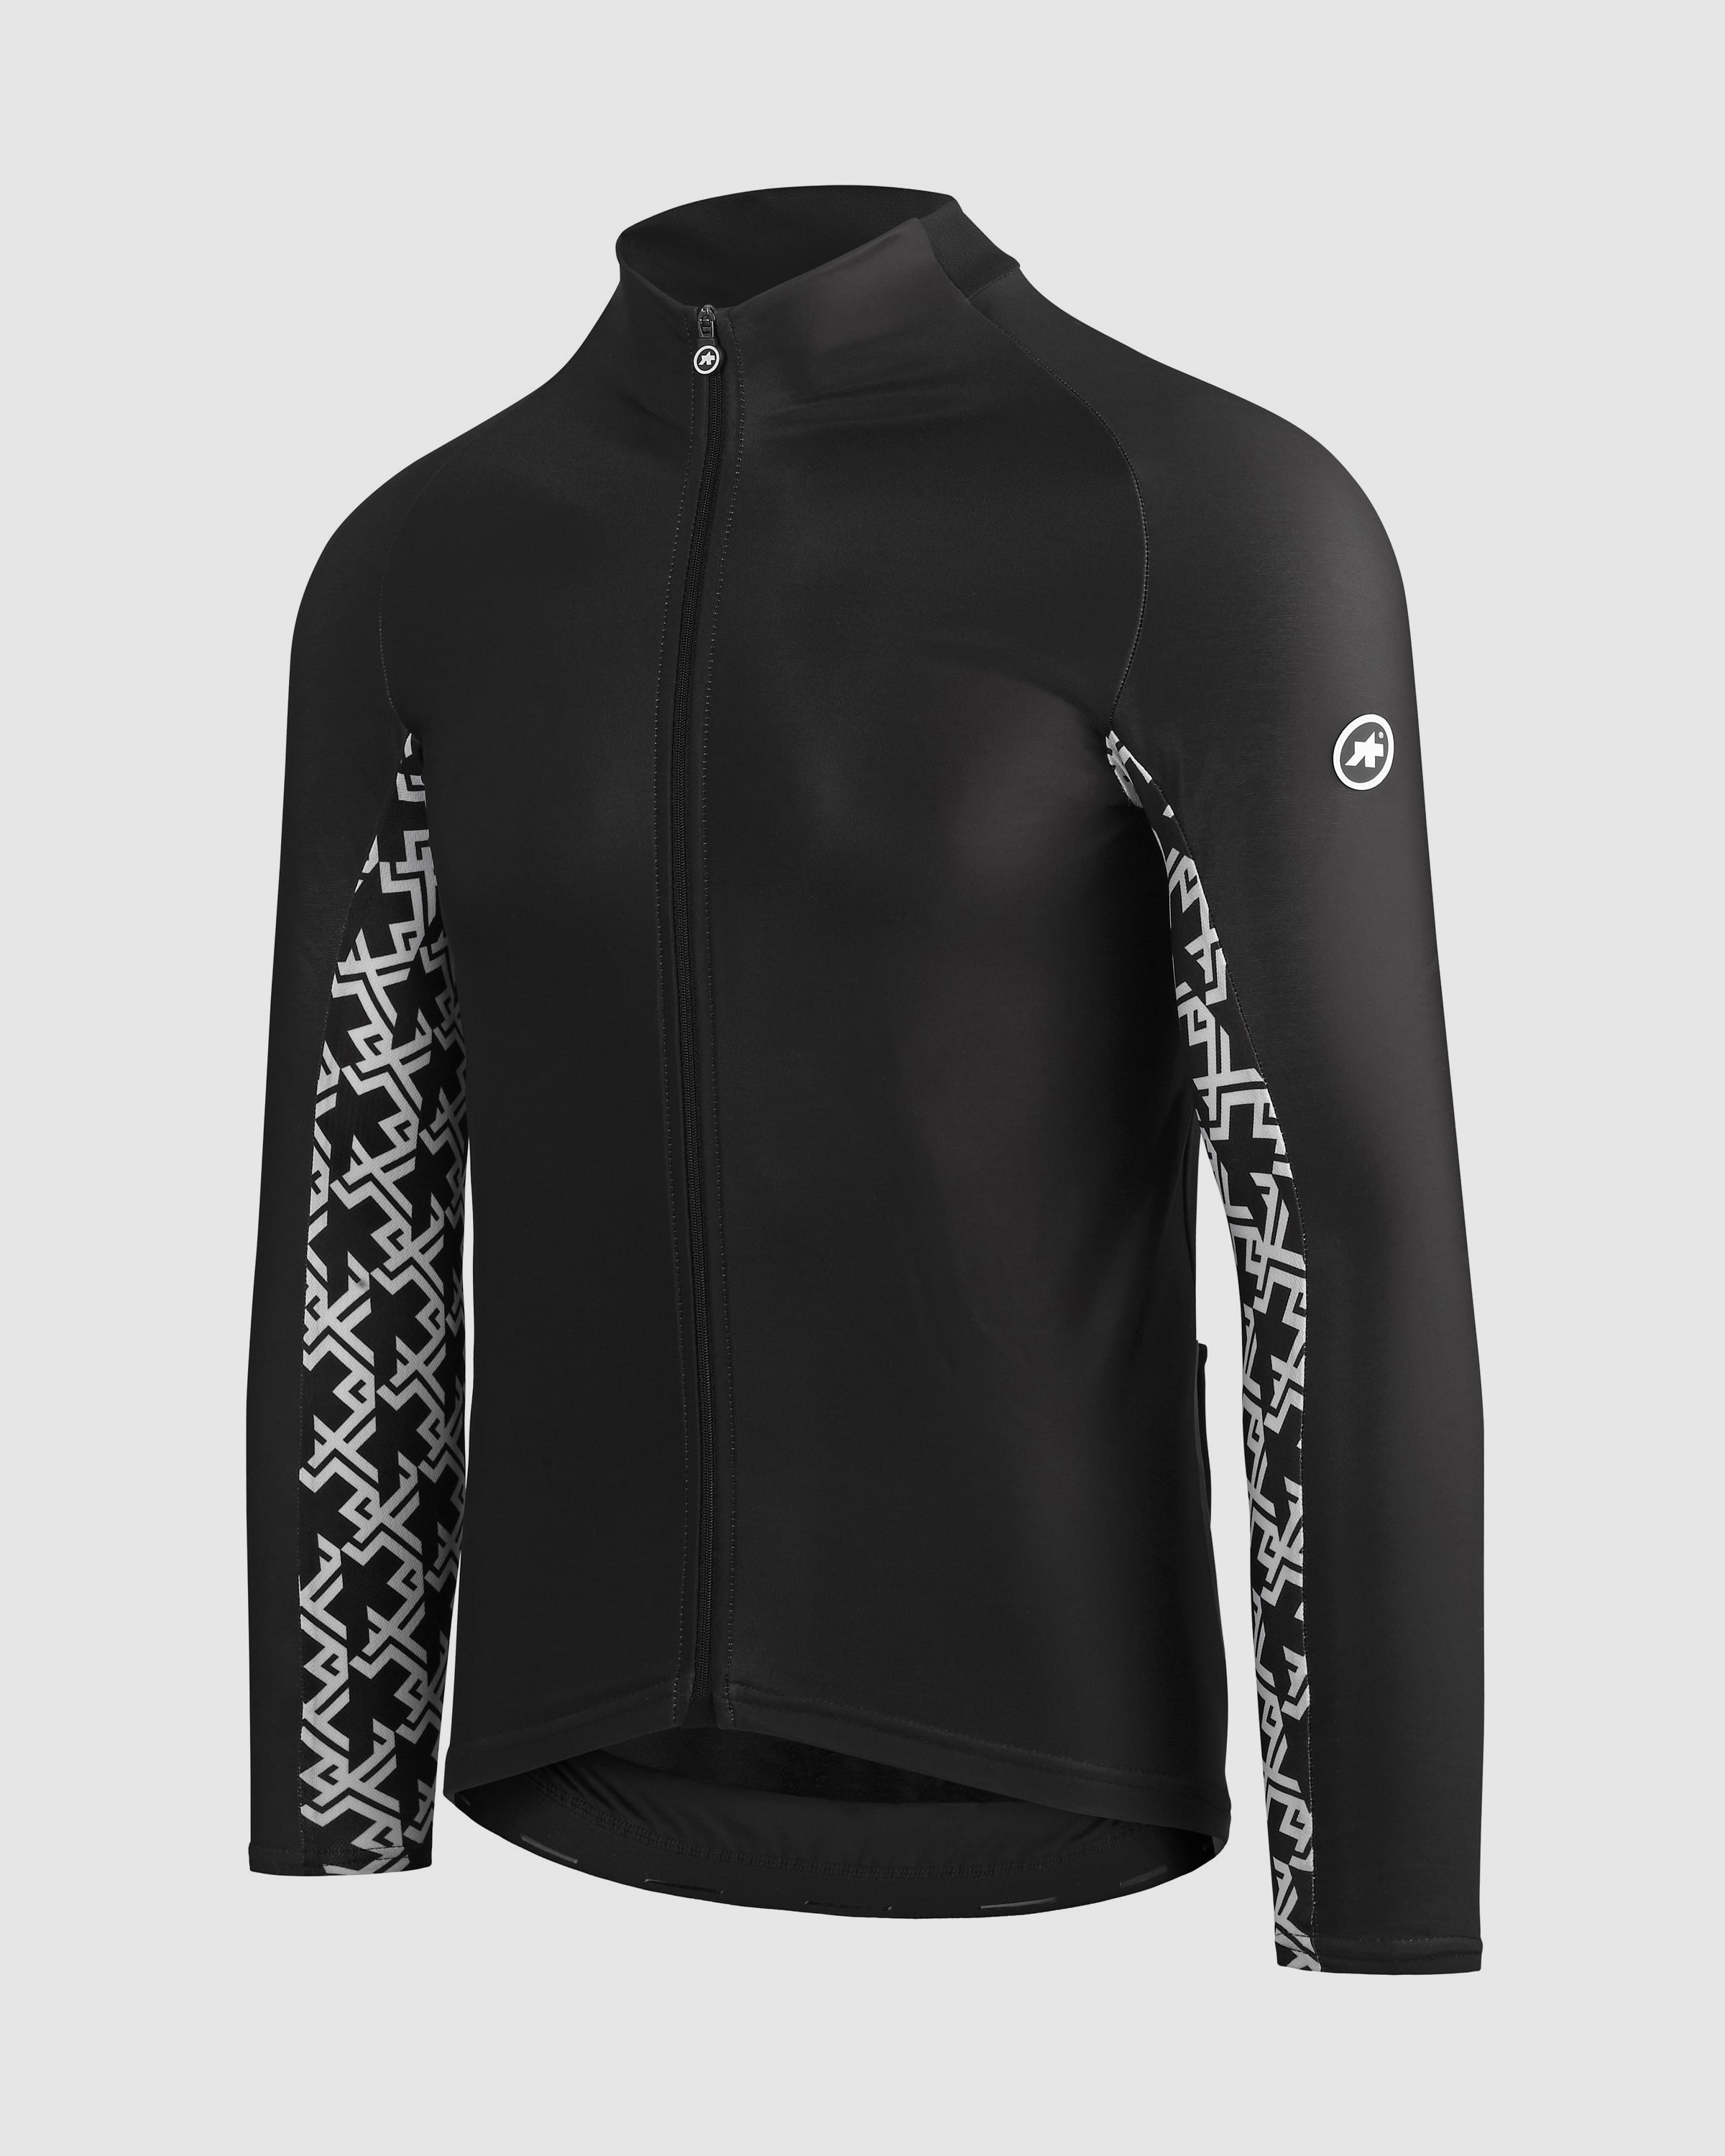 MILLE GT Spring Fall LS Jersey